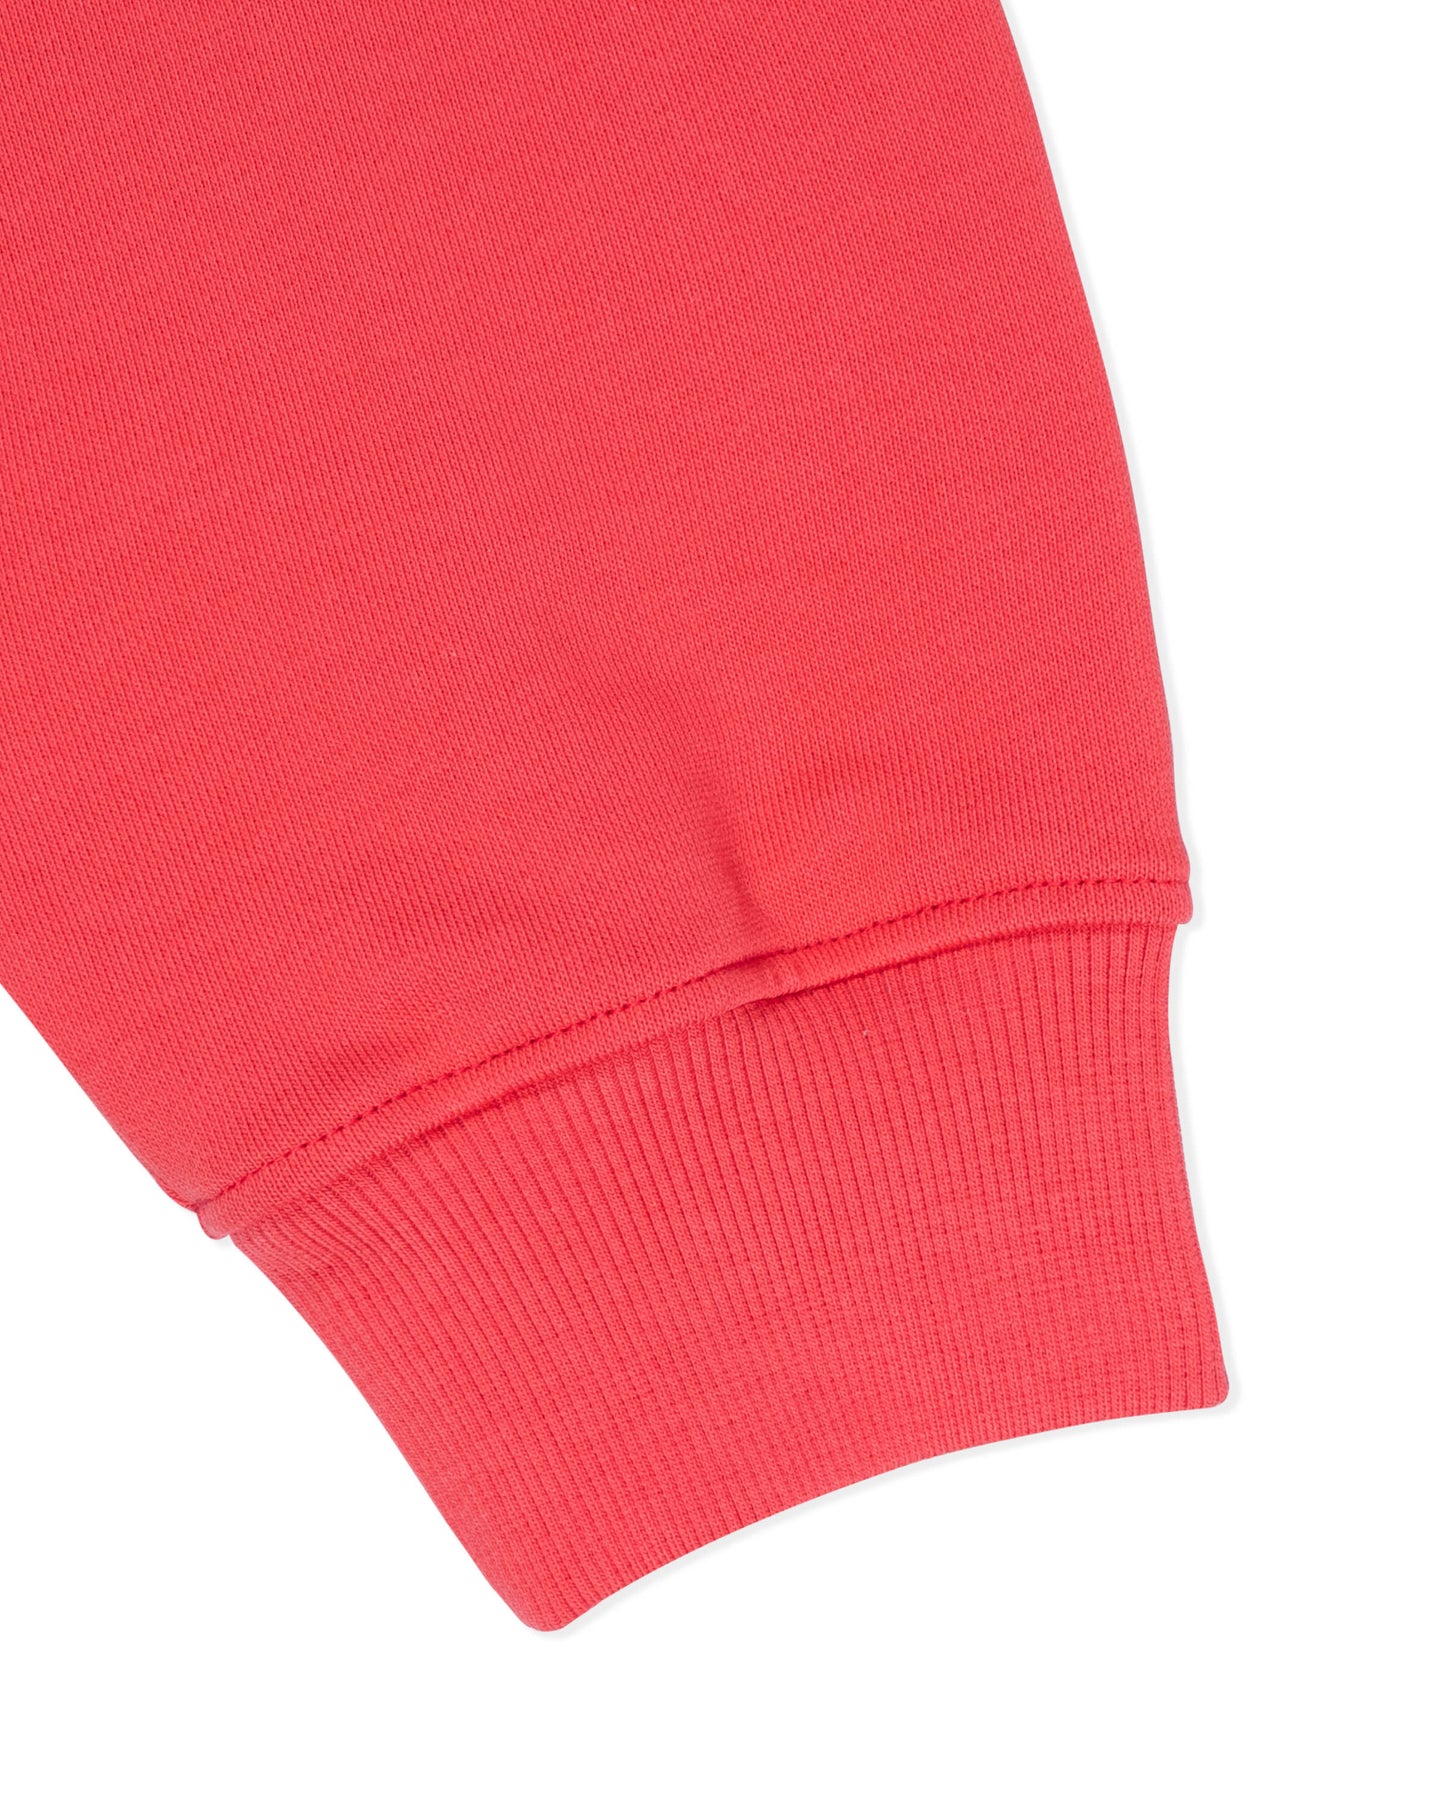 Levents® Classic Zipper Hoodie/ Red Coral